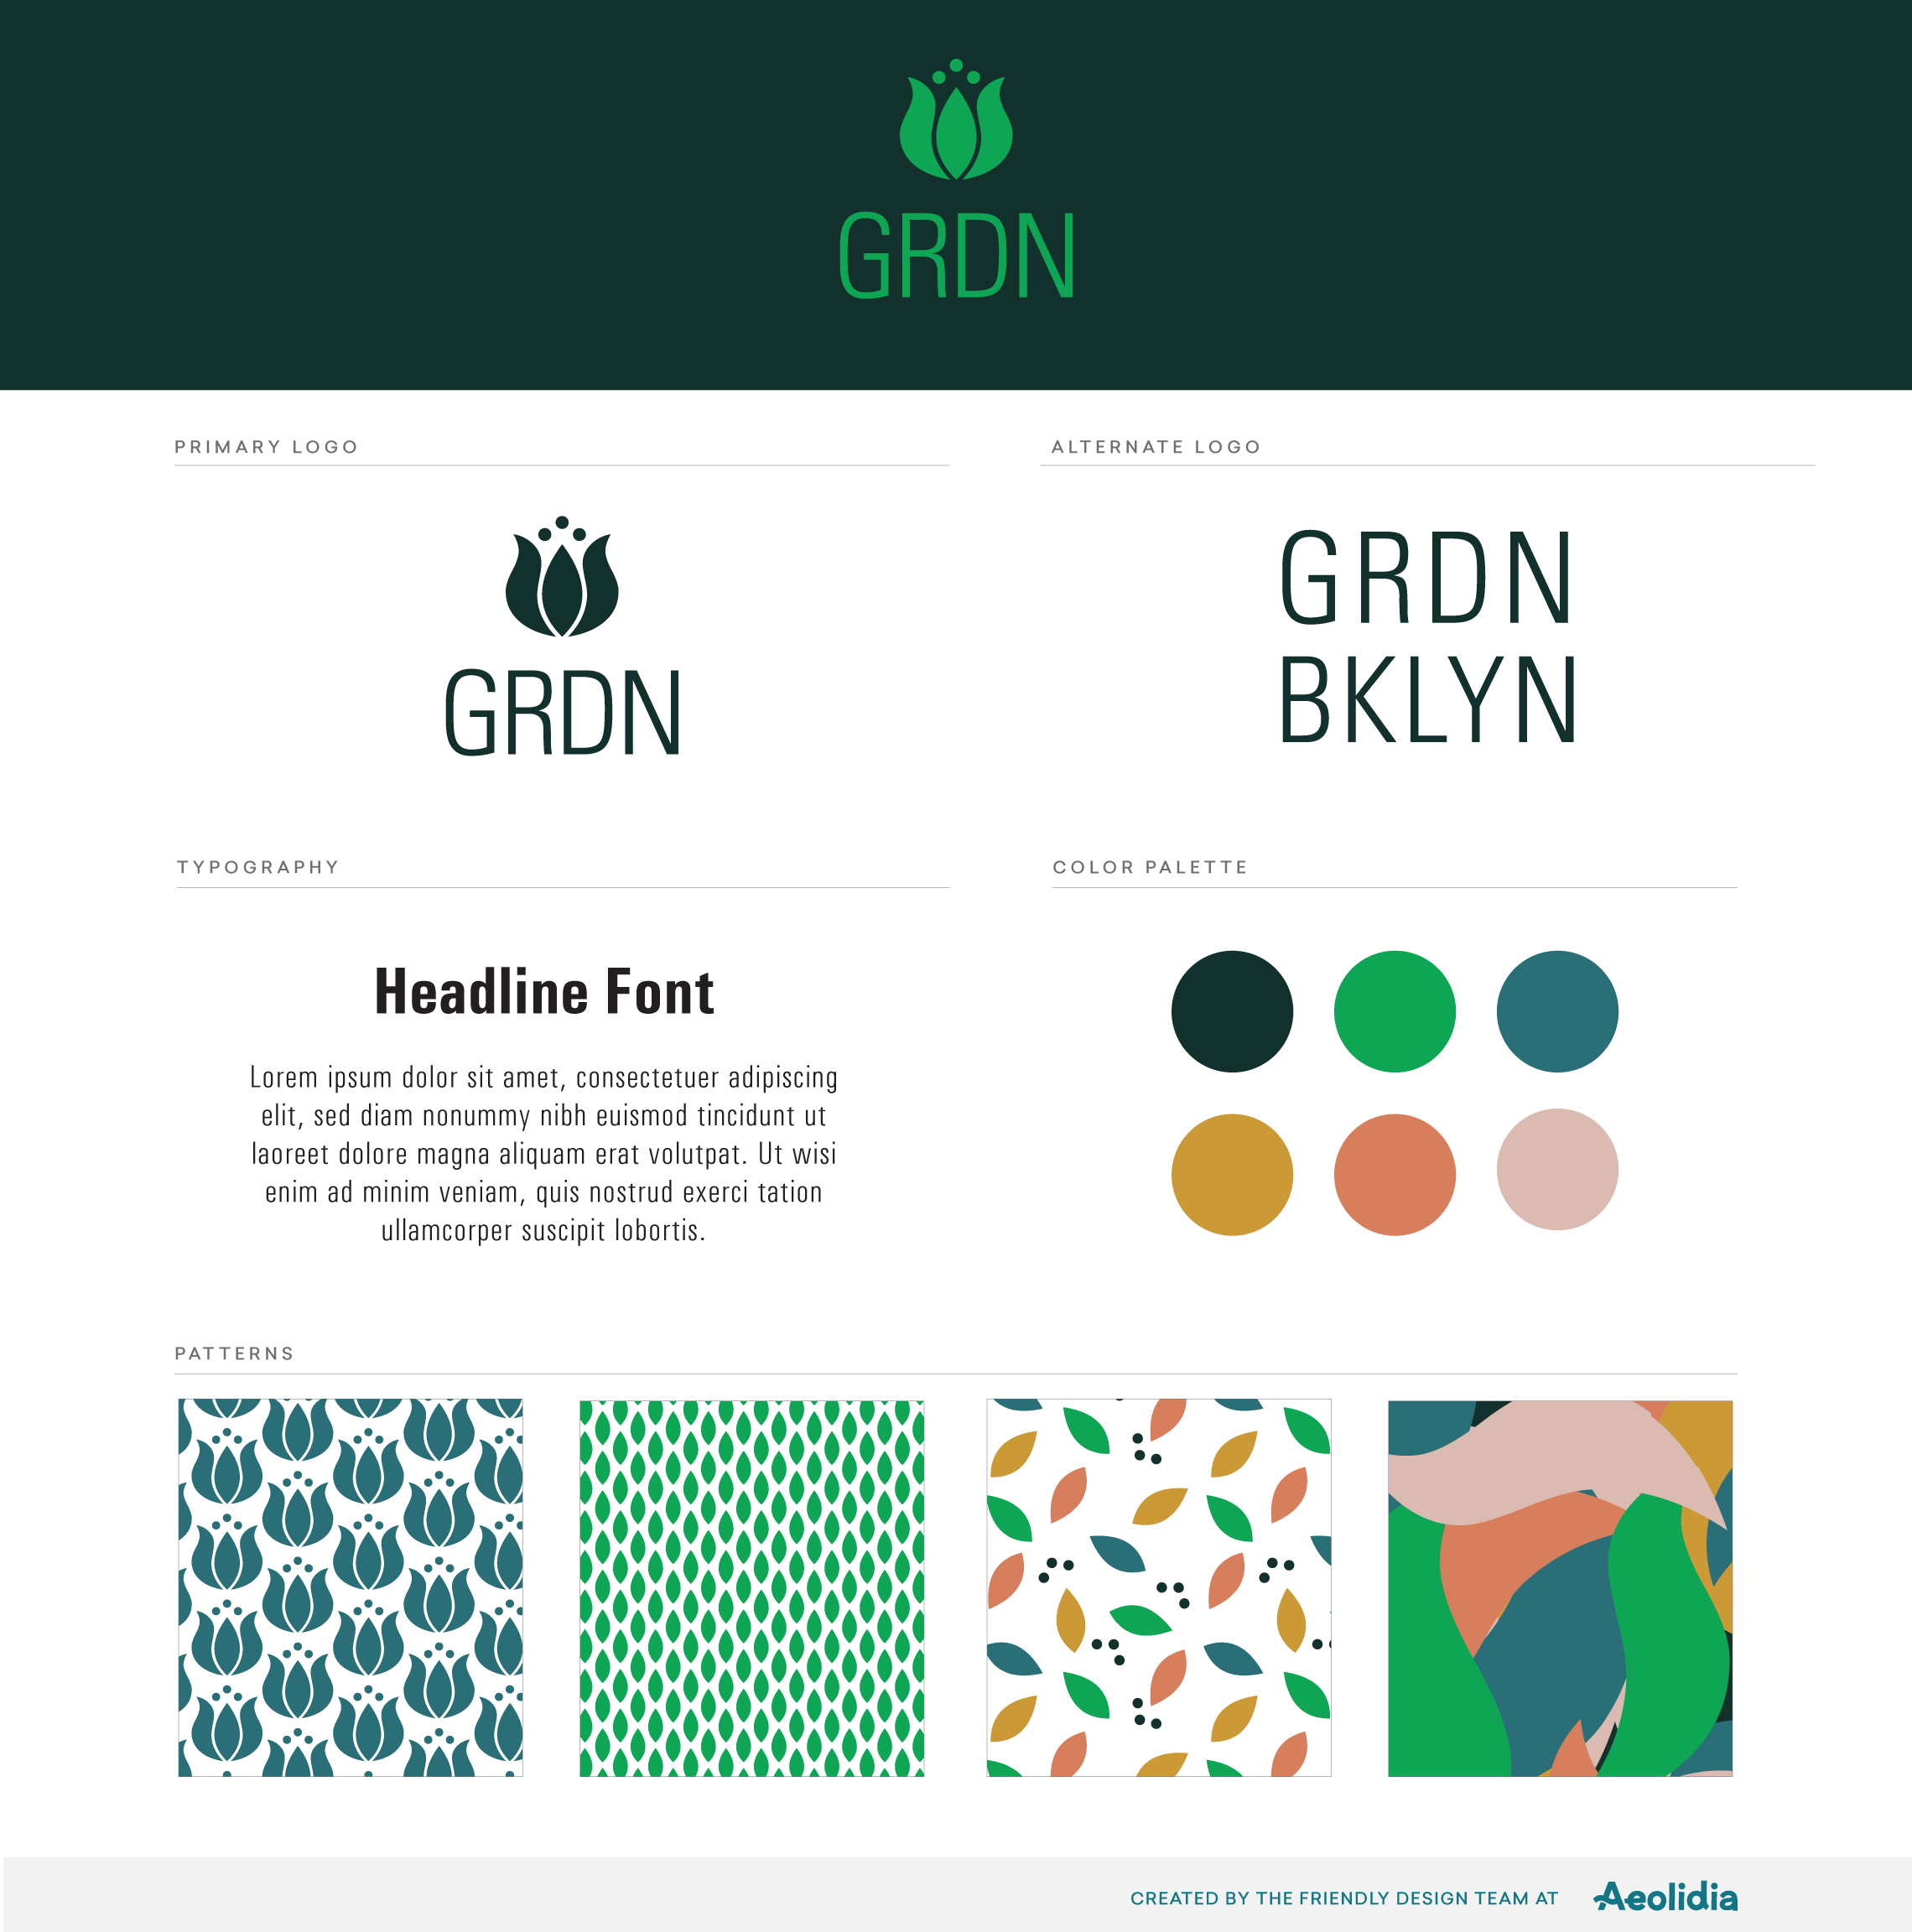 GRDN Brand guide with logo, colour palette, typography, and pattern design.